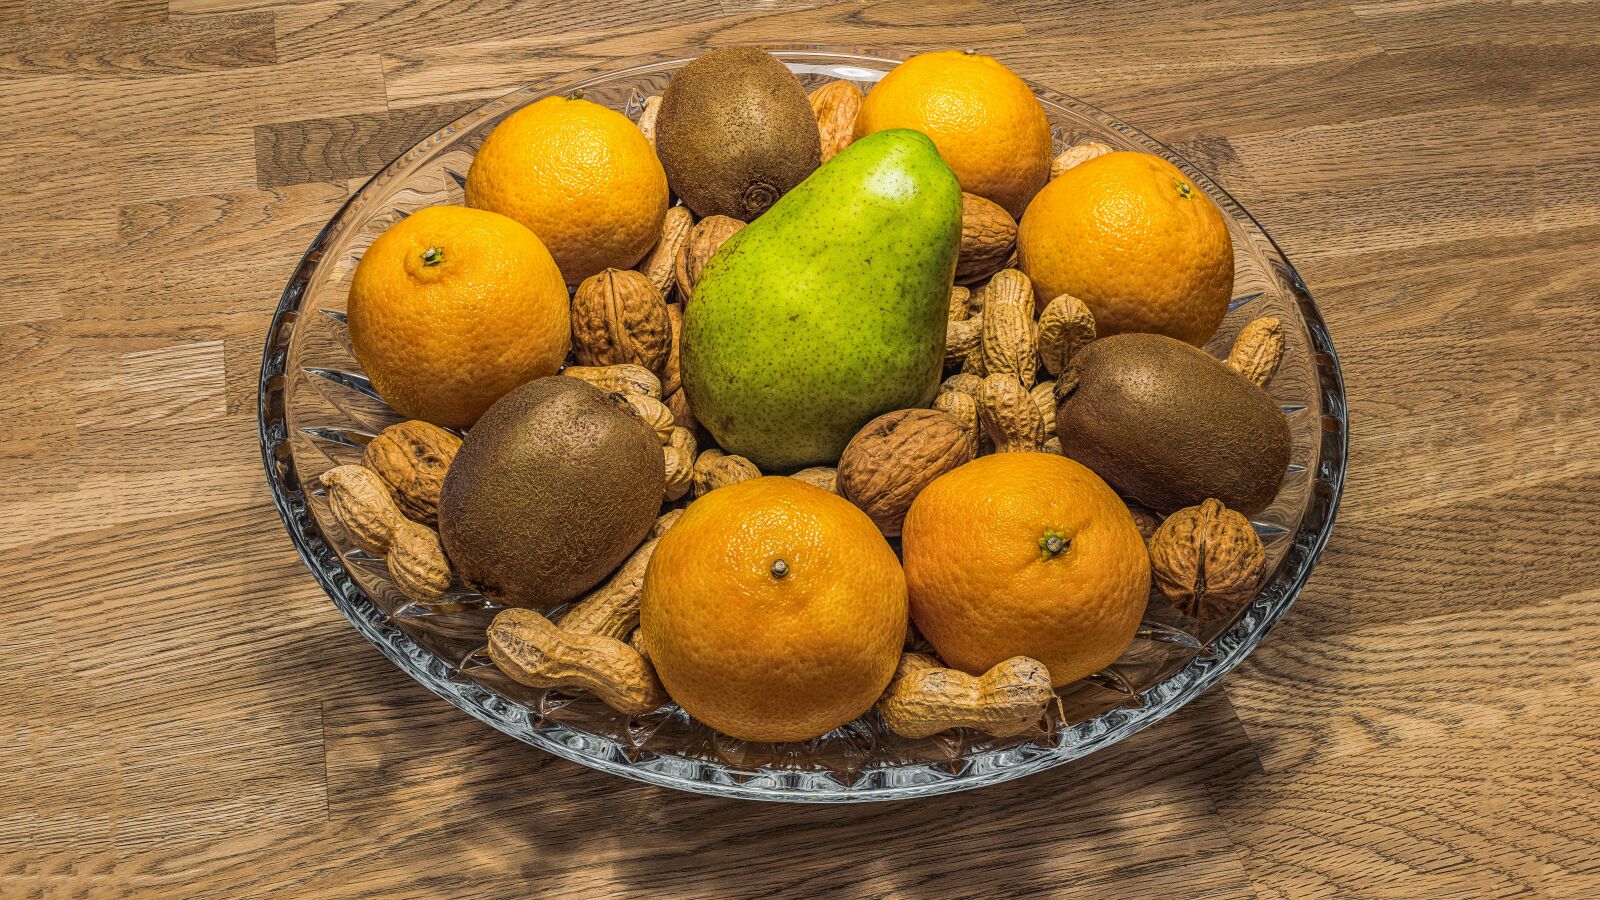 Sony a6300 sample photo. Fruit bowl, nuts, fruit photography